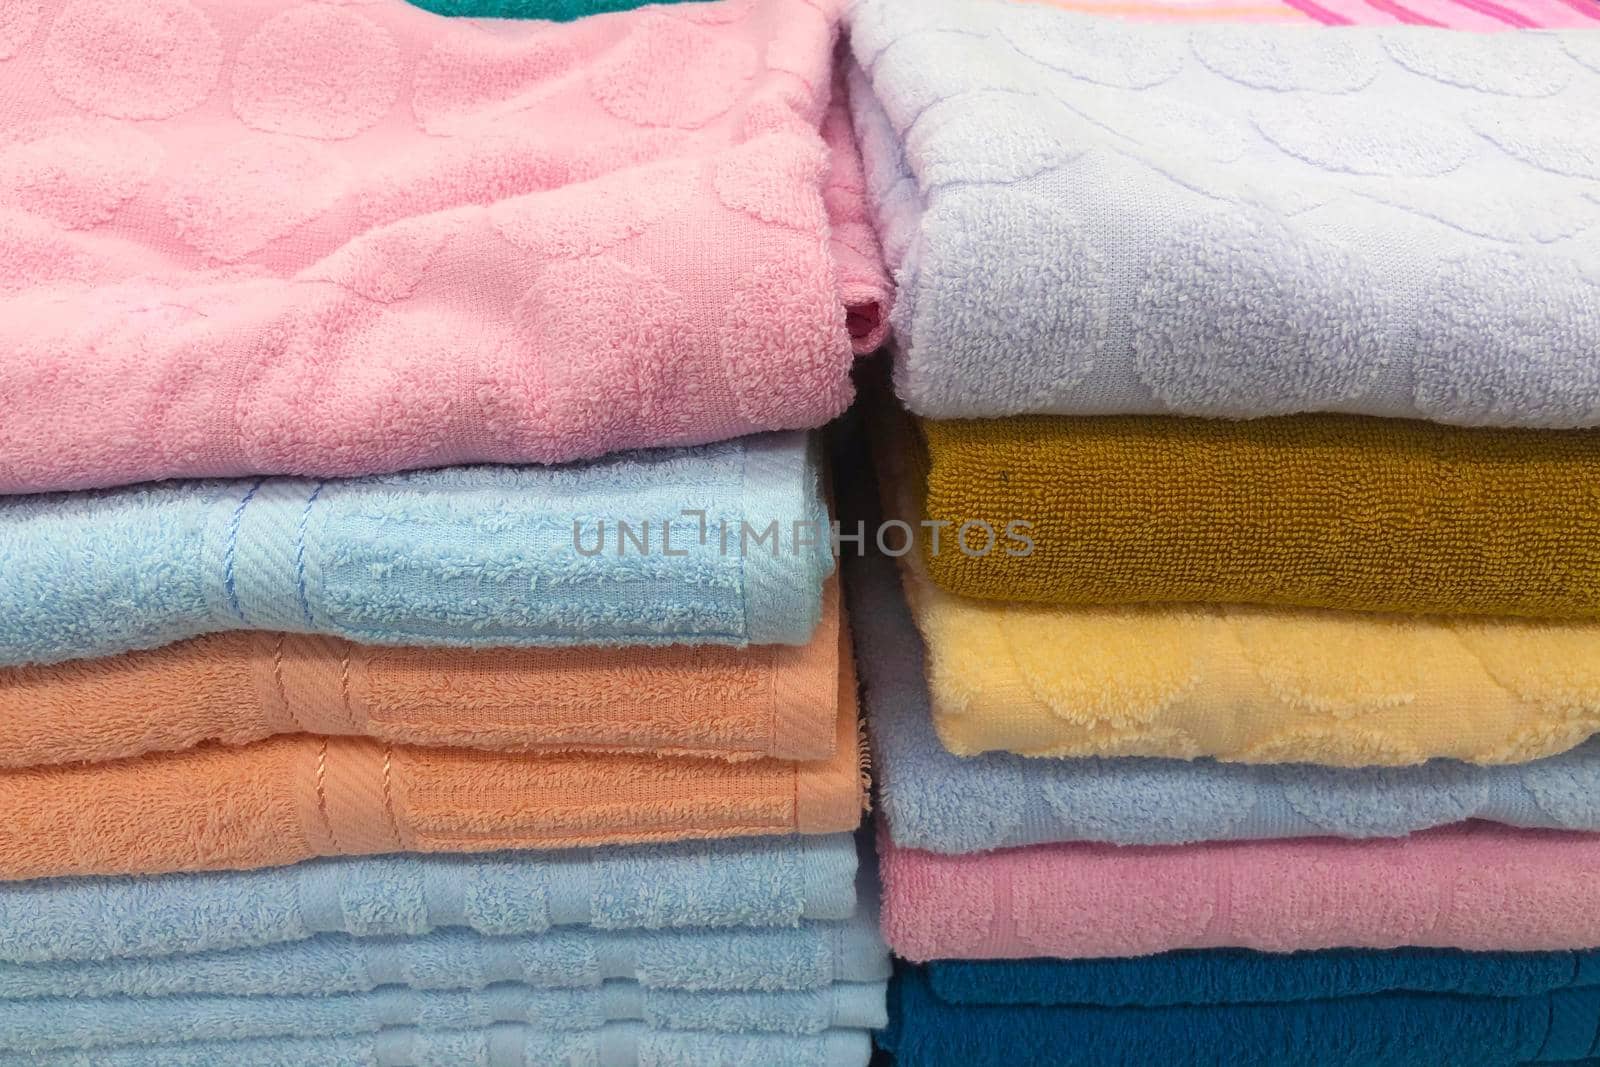 Folded towels for sale in the mall. by iPixel_Studio